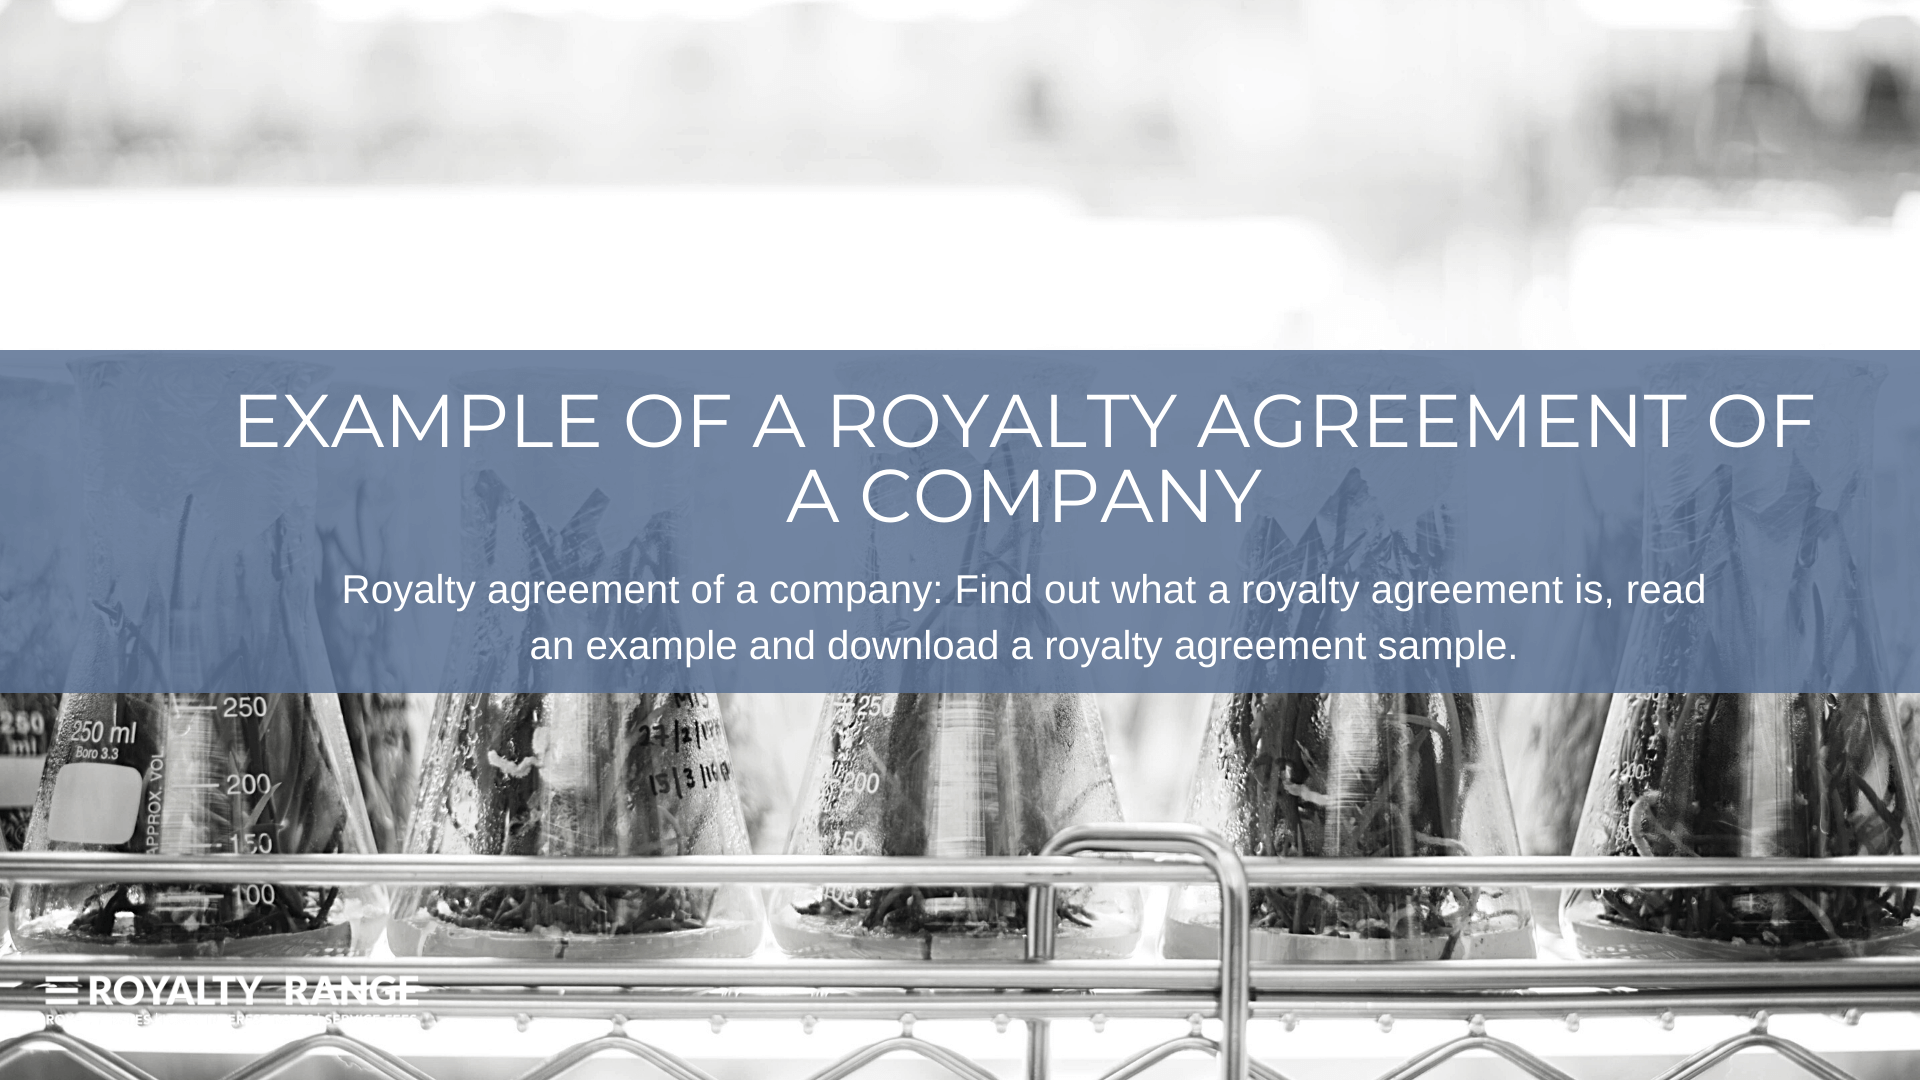 Example of a royalty agreement of a company